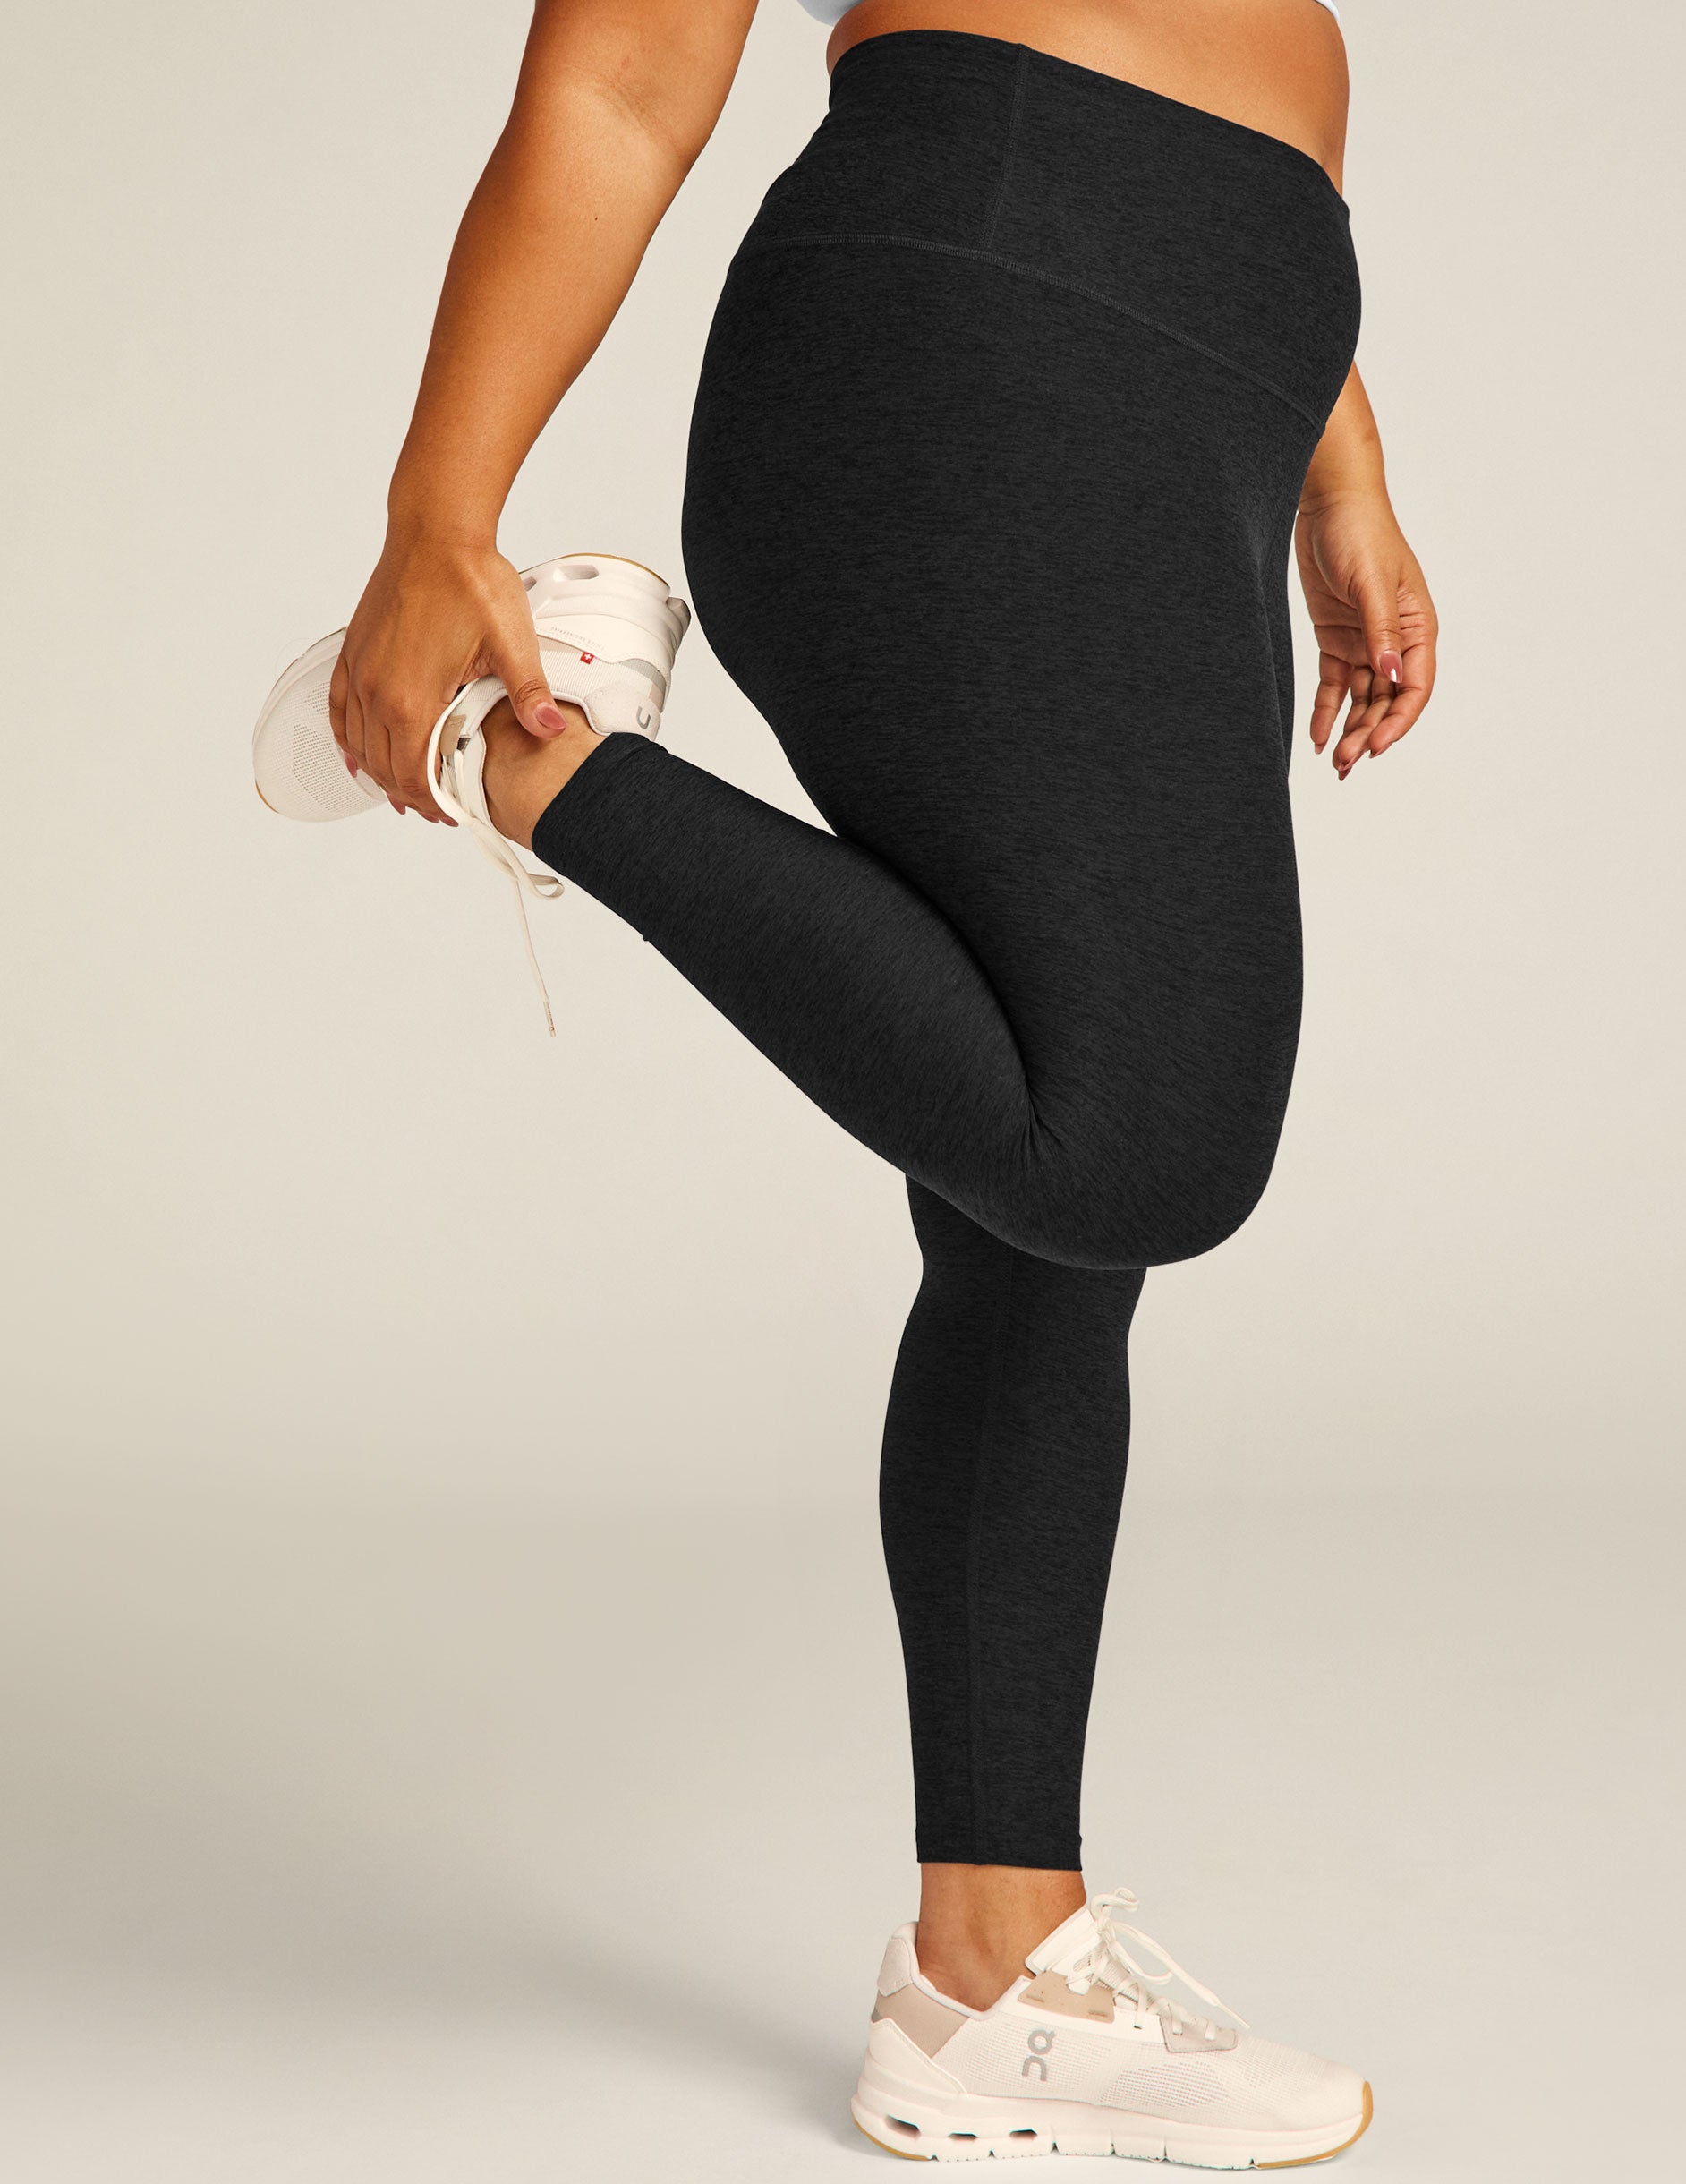 Spacedye Caught In the Midi High Waisted Legging - Silverberry Heather –  Carbon38